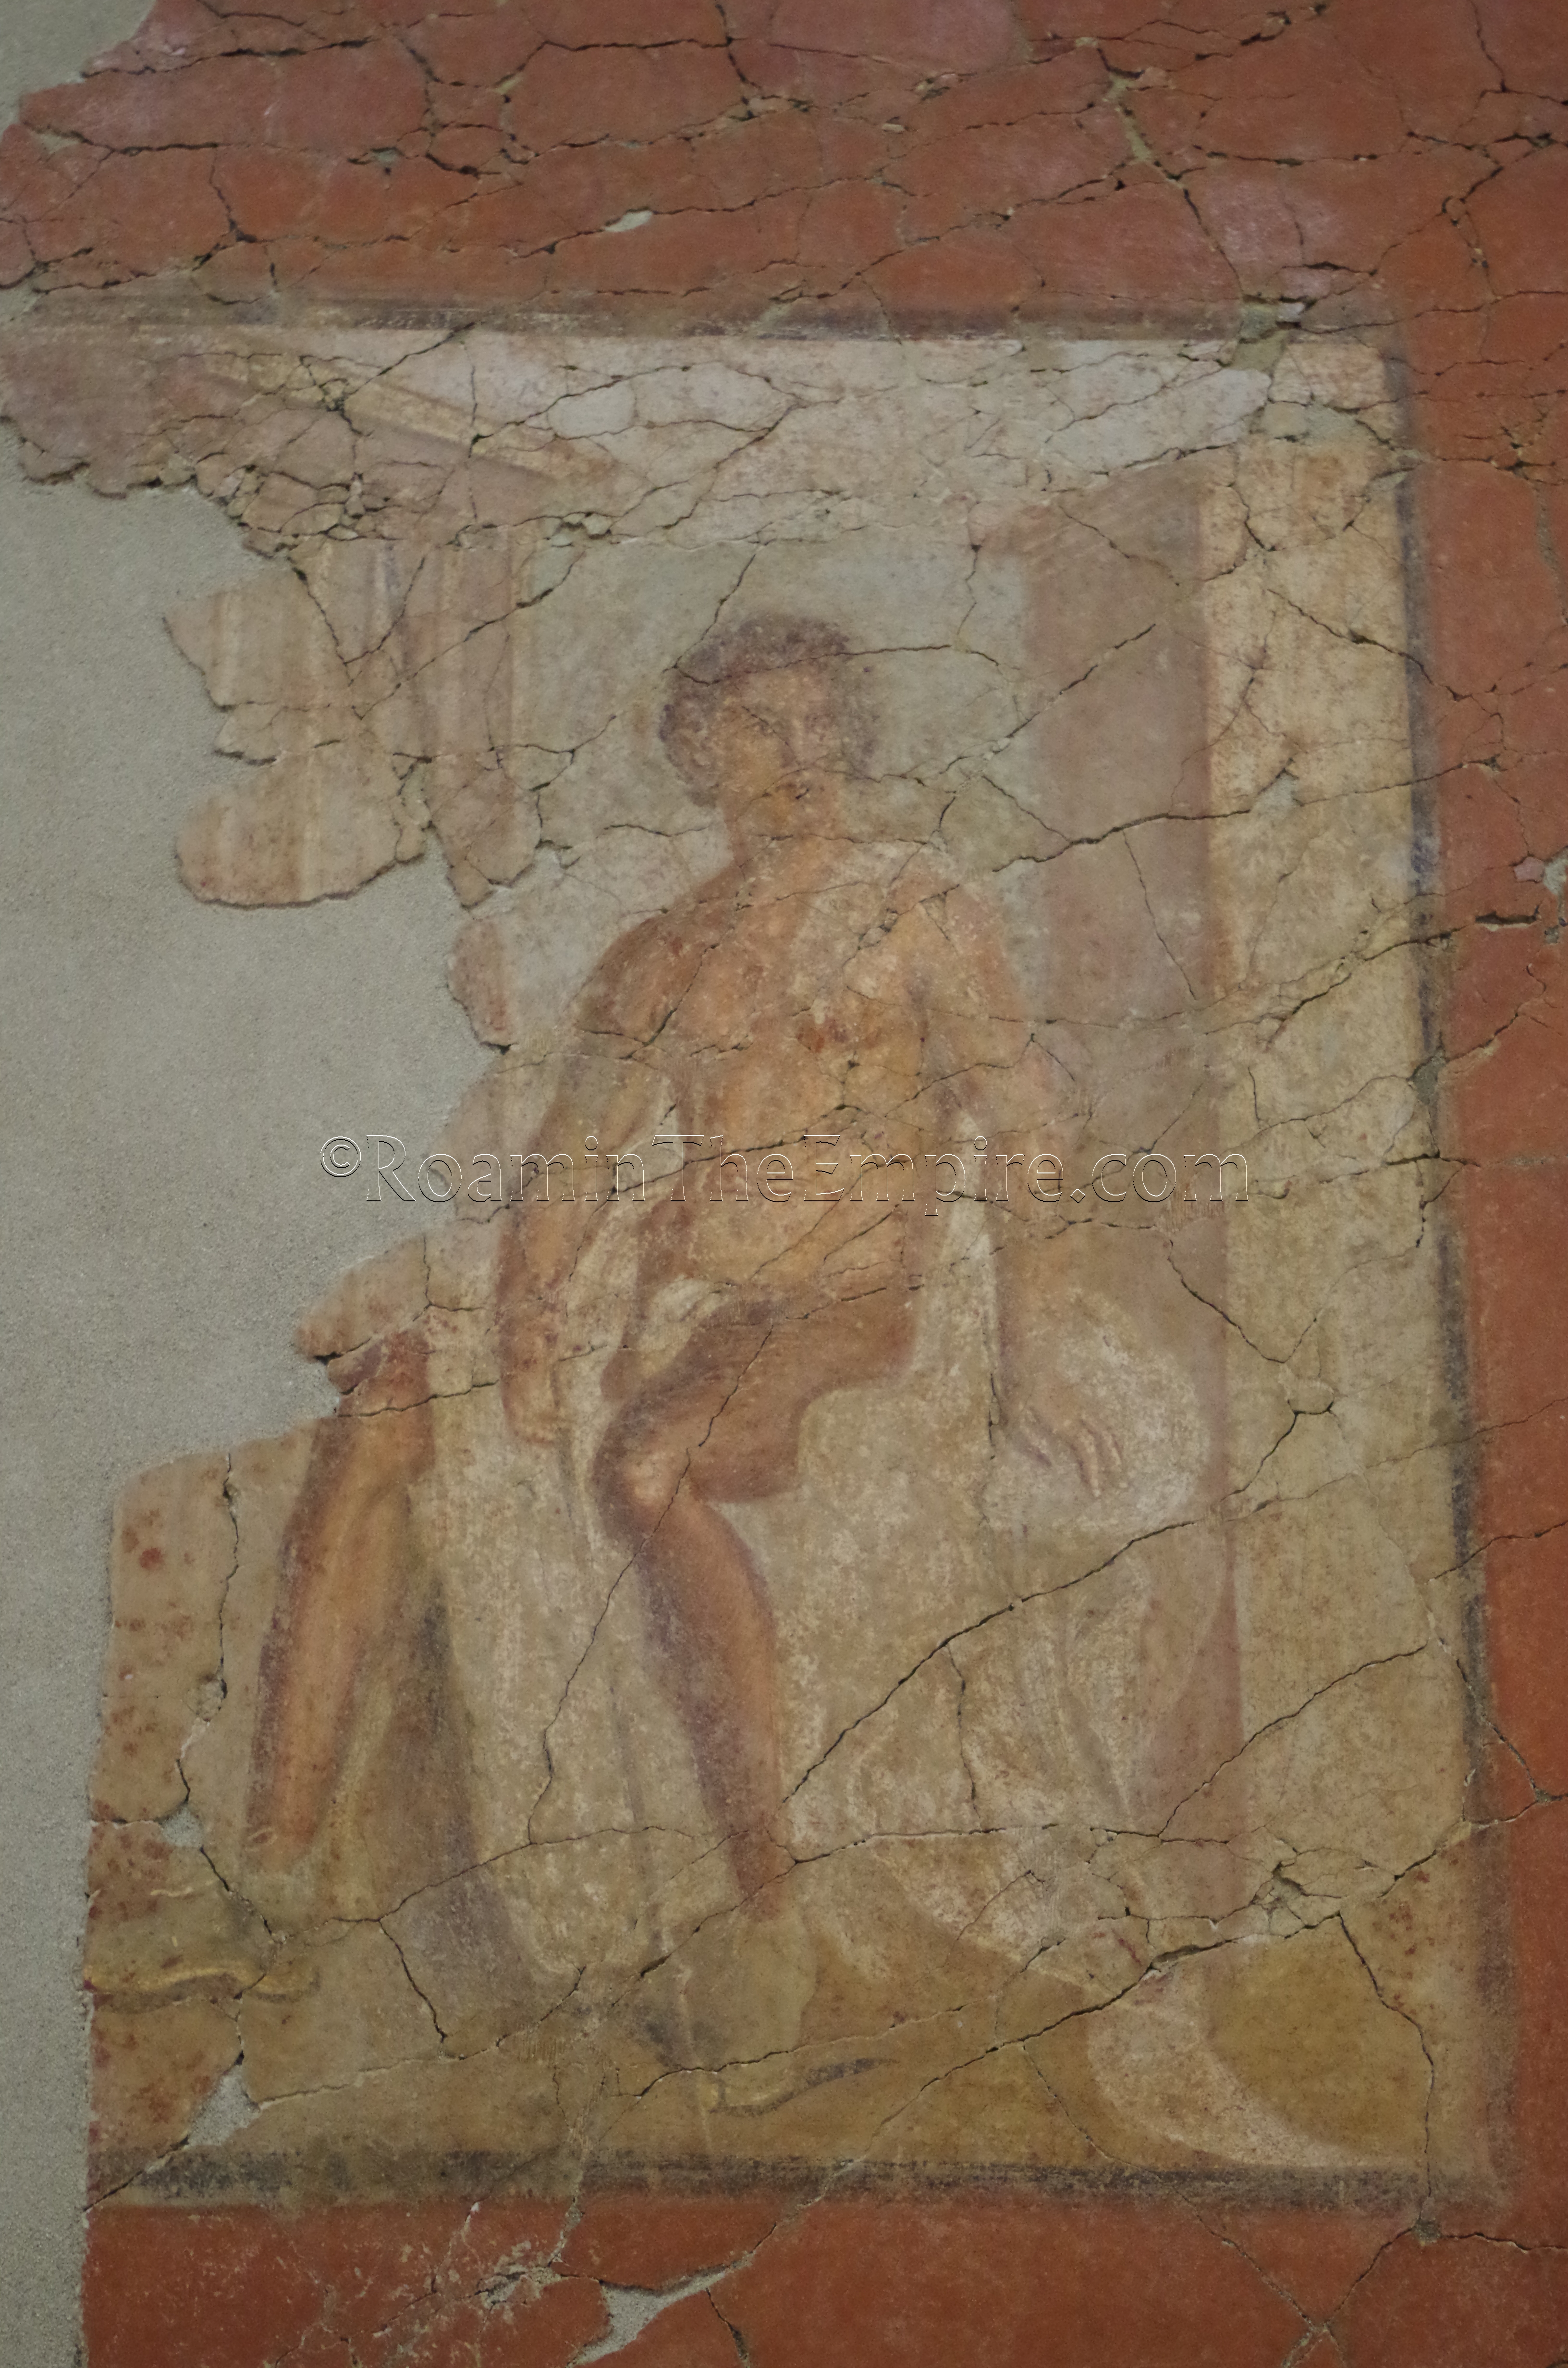 Wall painting found in Nîmes , dating to 30-40 CE. Displayed in the Musée de la Romanité.